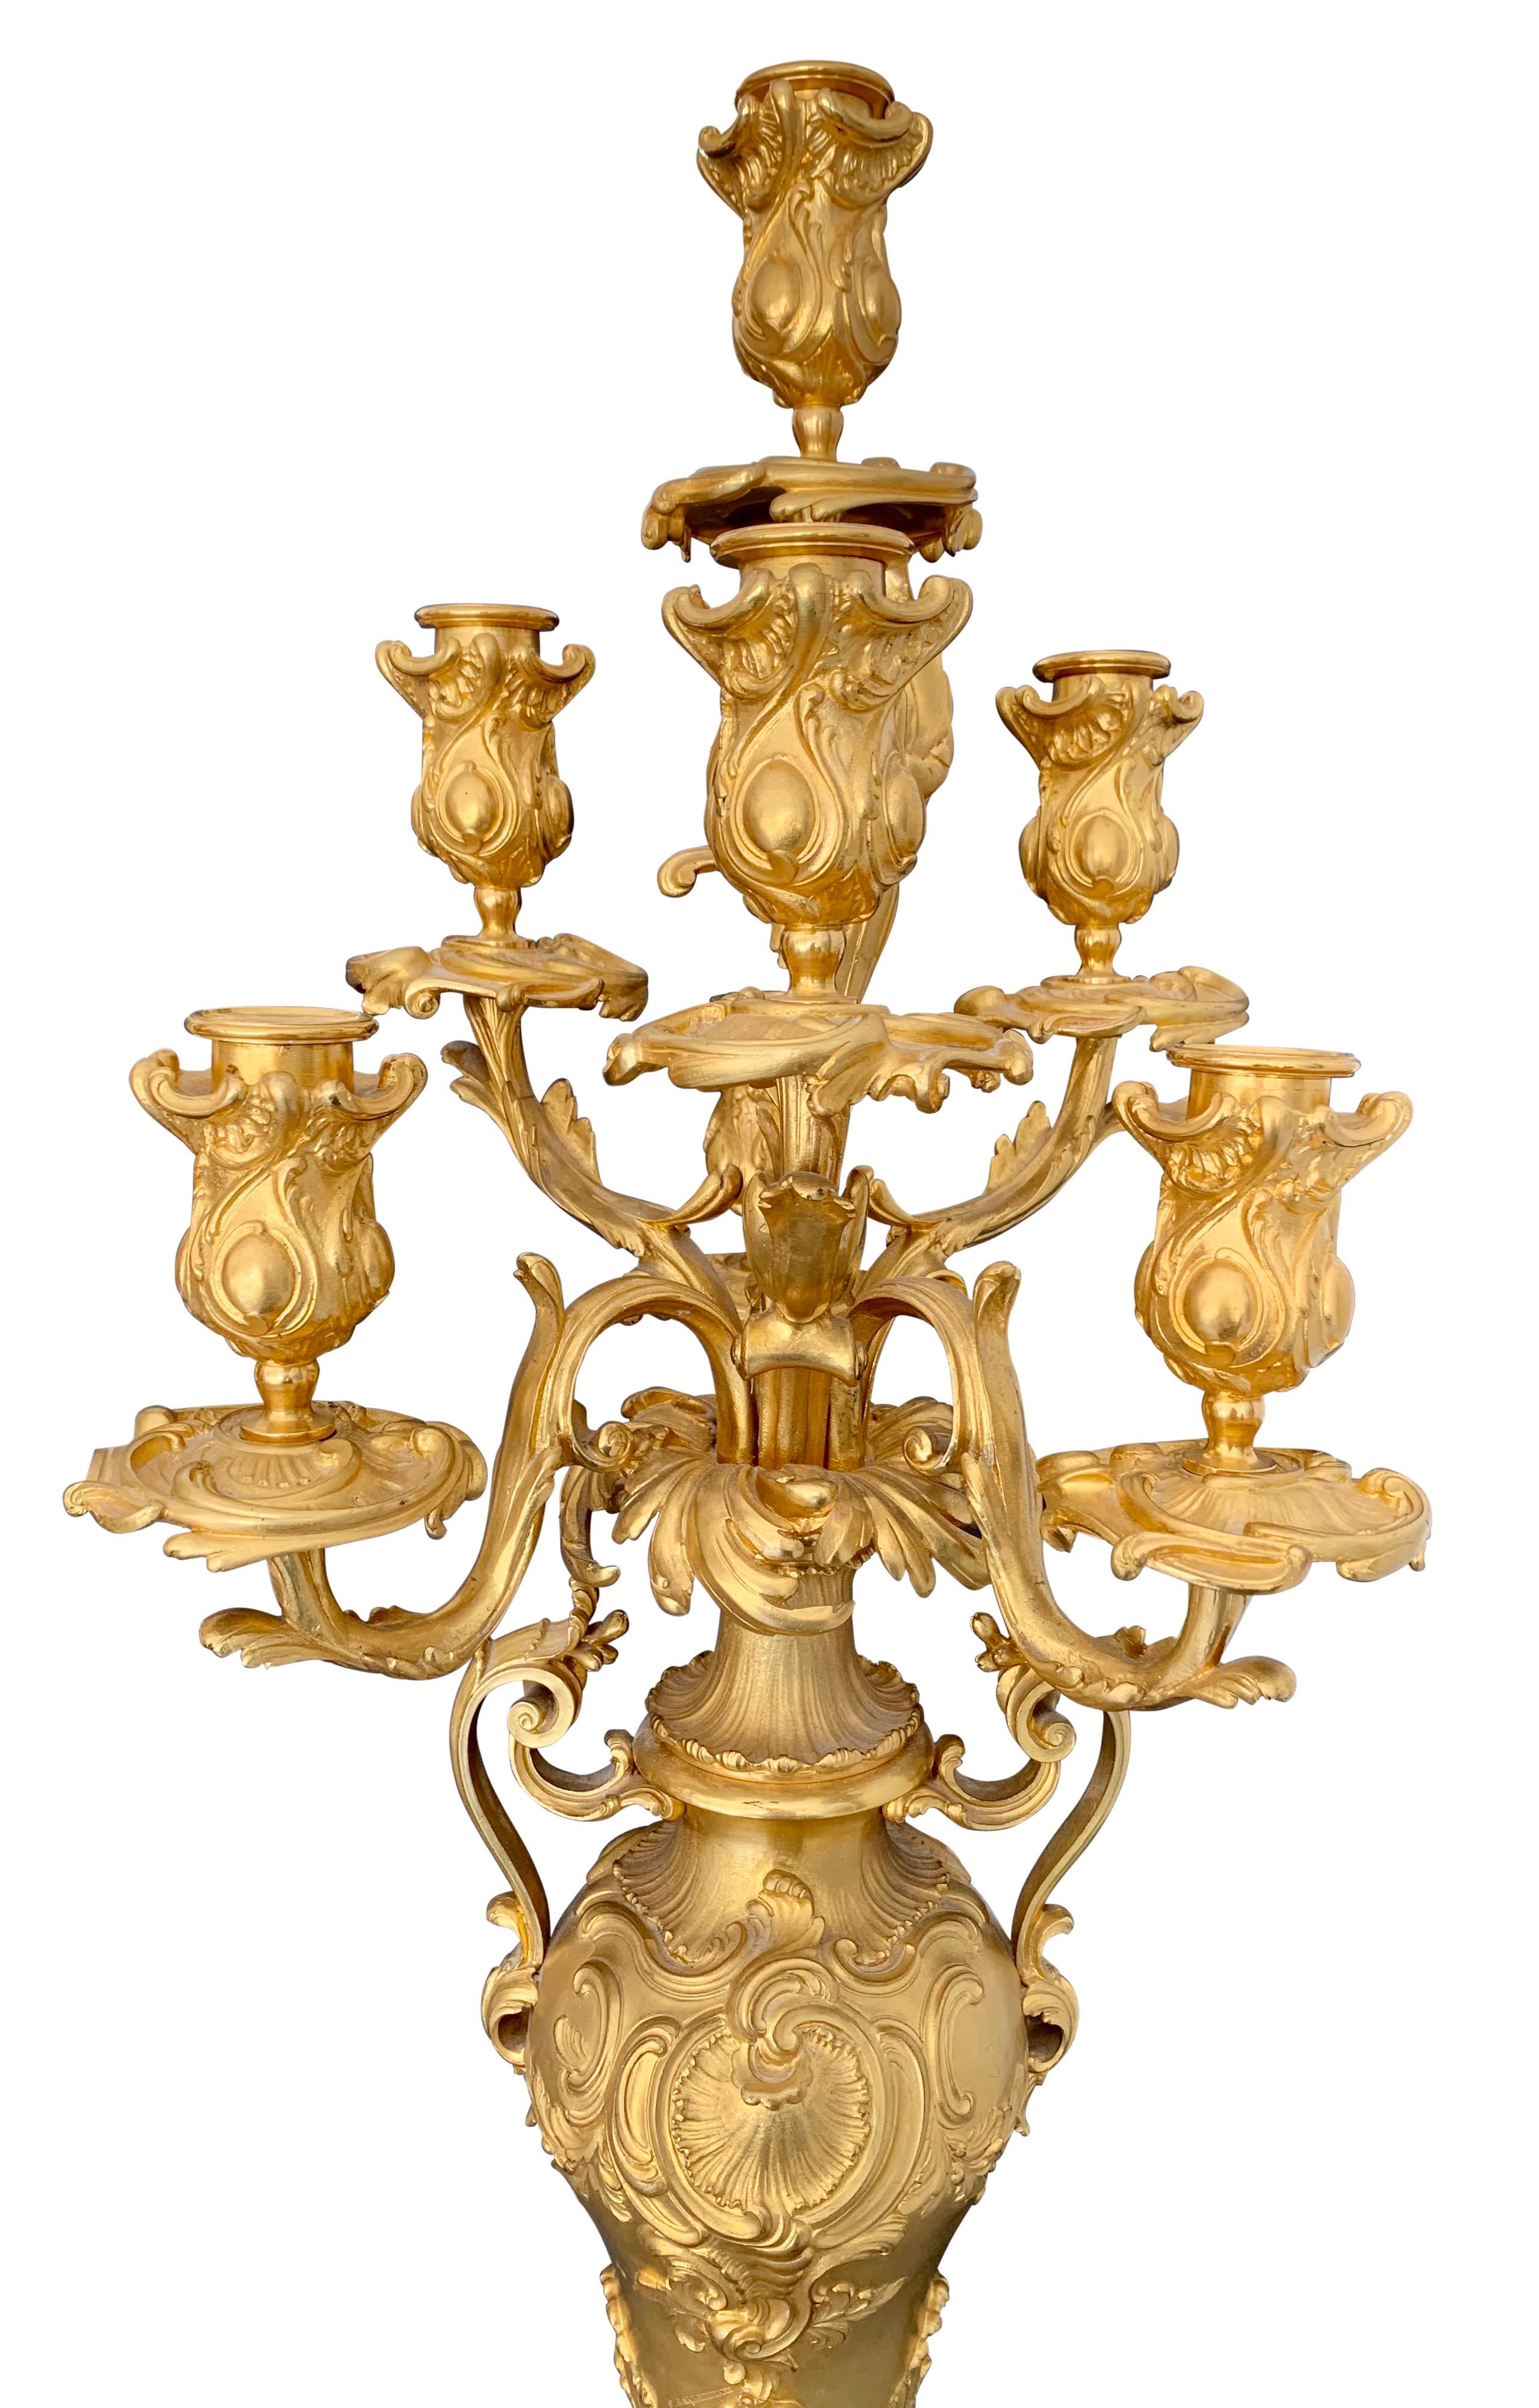 A superb quality pair of French Louis XV style ormolu and Rouge Griotte marble seven arm candelabras by Ferdinand Barbedienne. Each is raised by a square Rouge Griotte marble base above scrolled ormolu feet with acanthus leaf ormolu mounts. Each